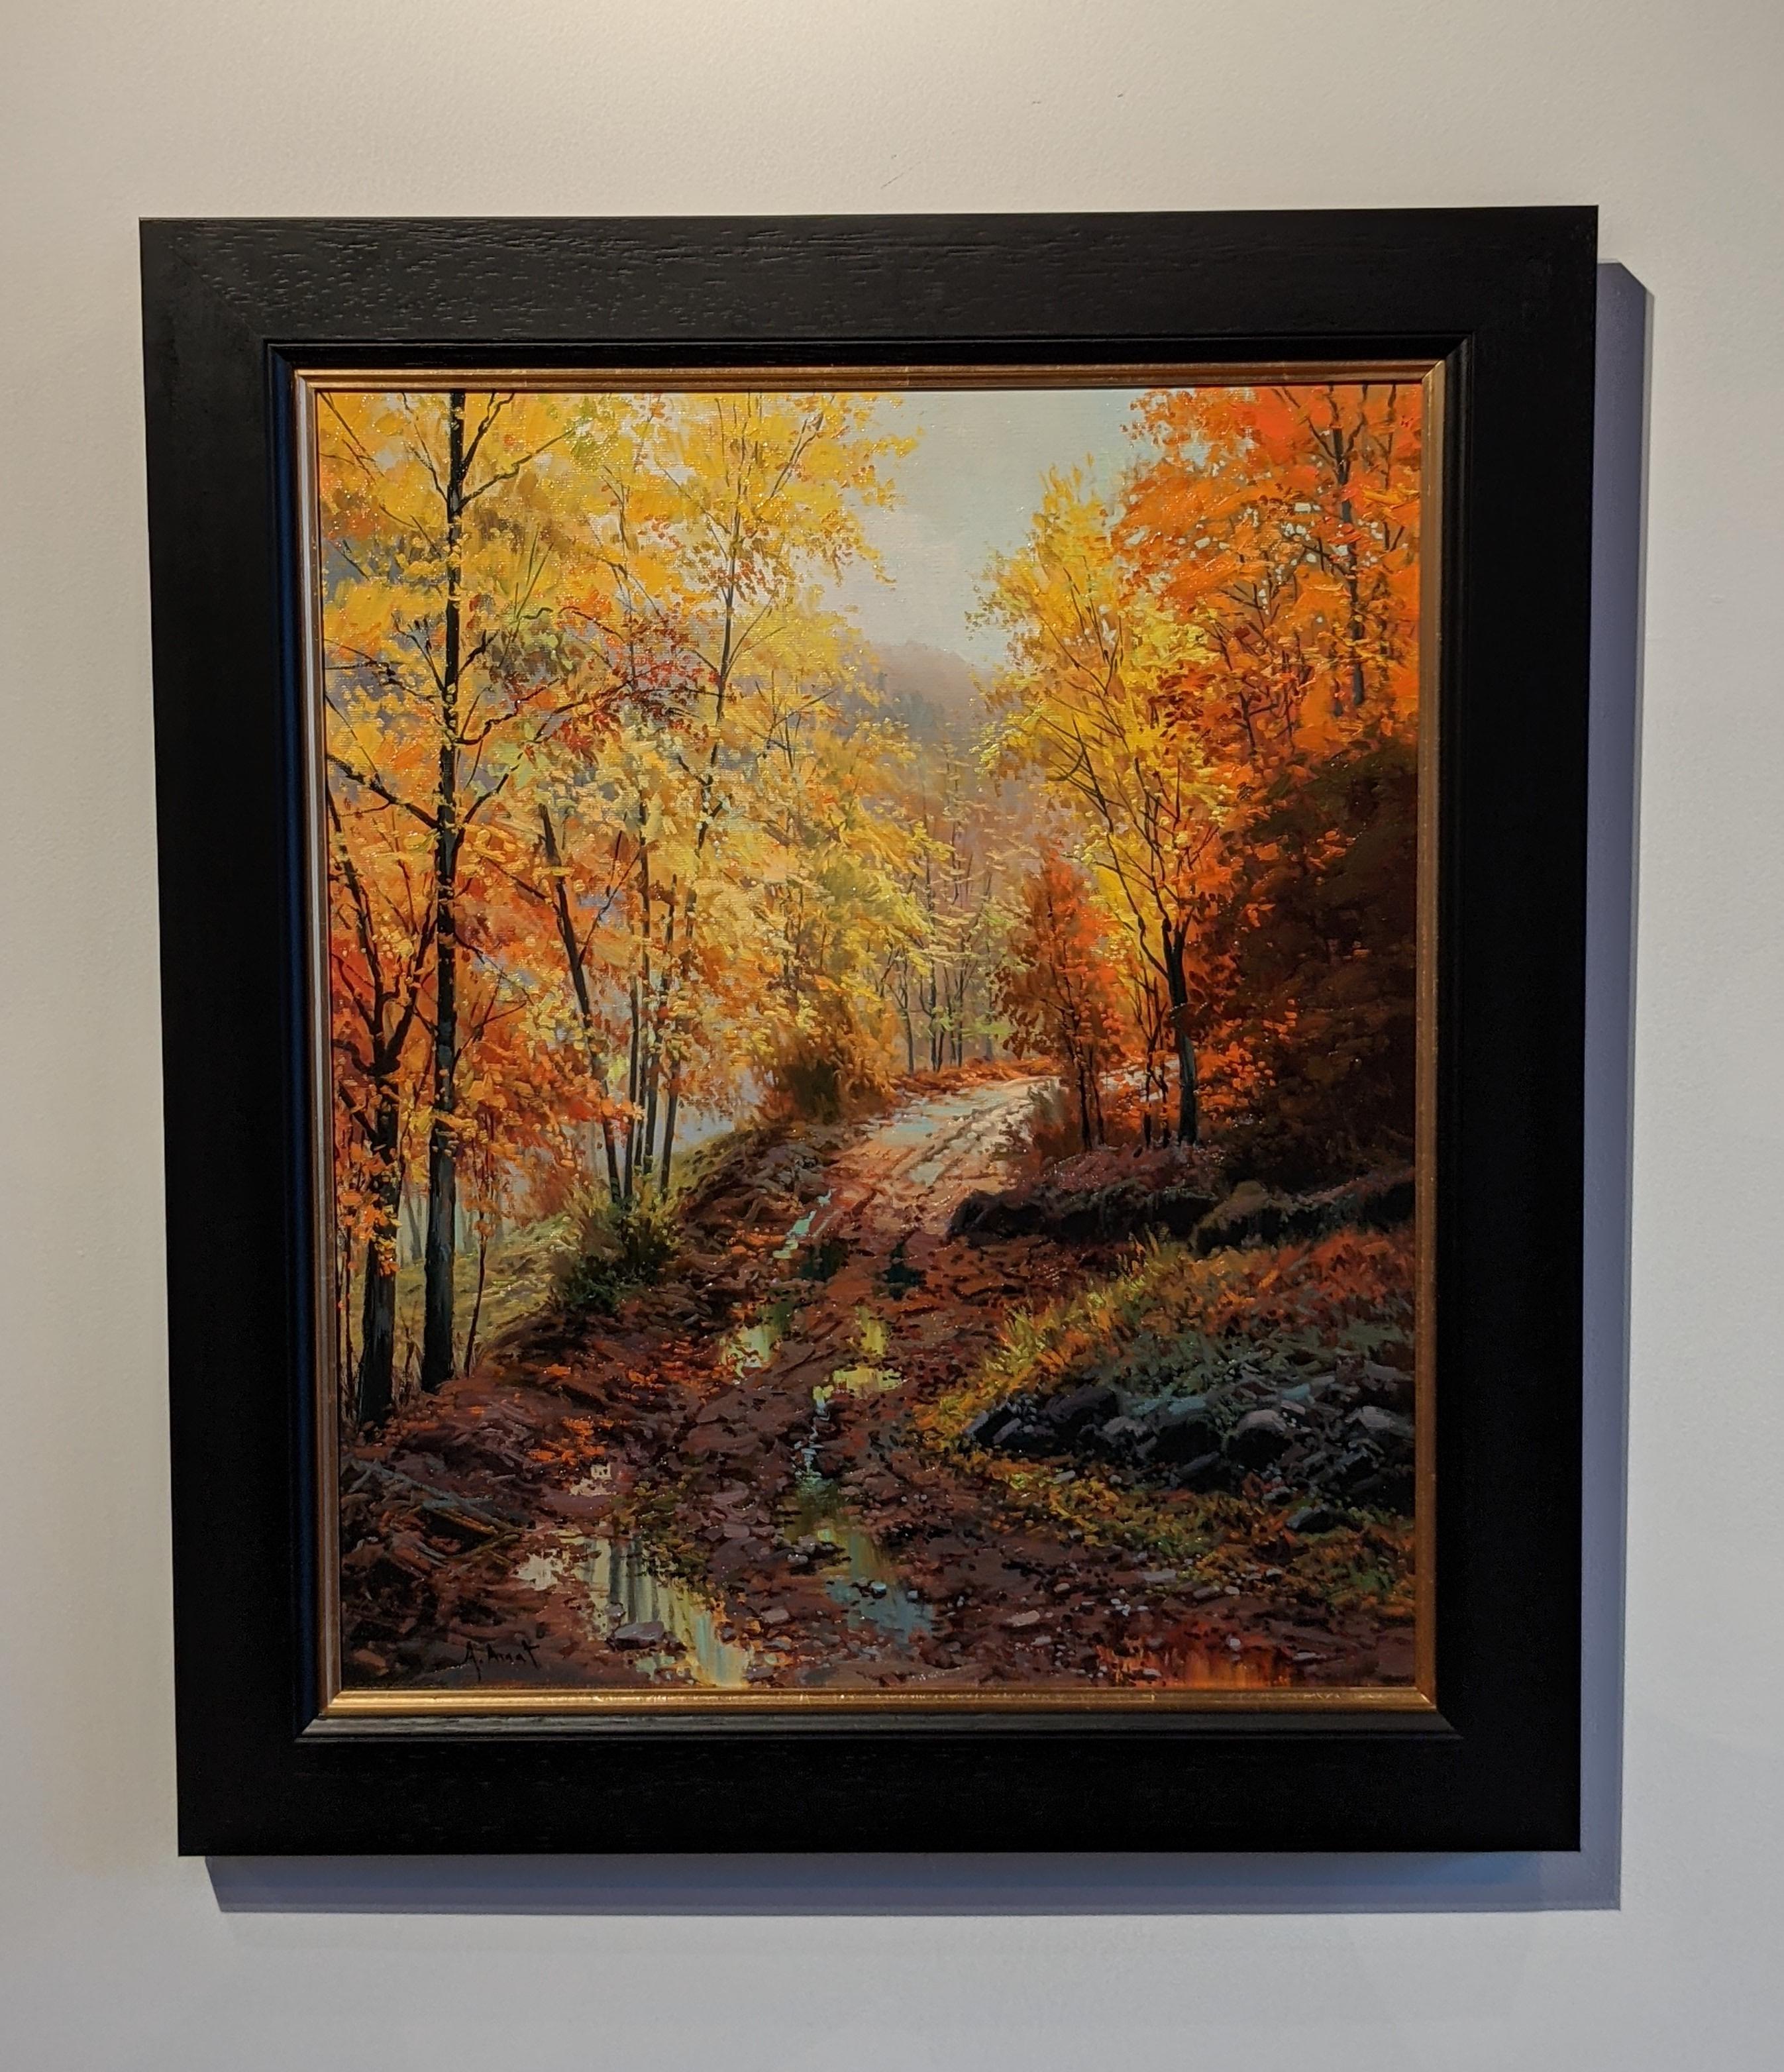 Amal Amatt Landscape Painting - 'Autumn in the Woods' Contemporary landscape painting of yellow trees and path